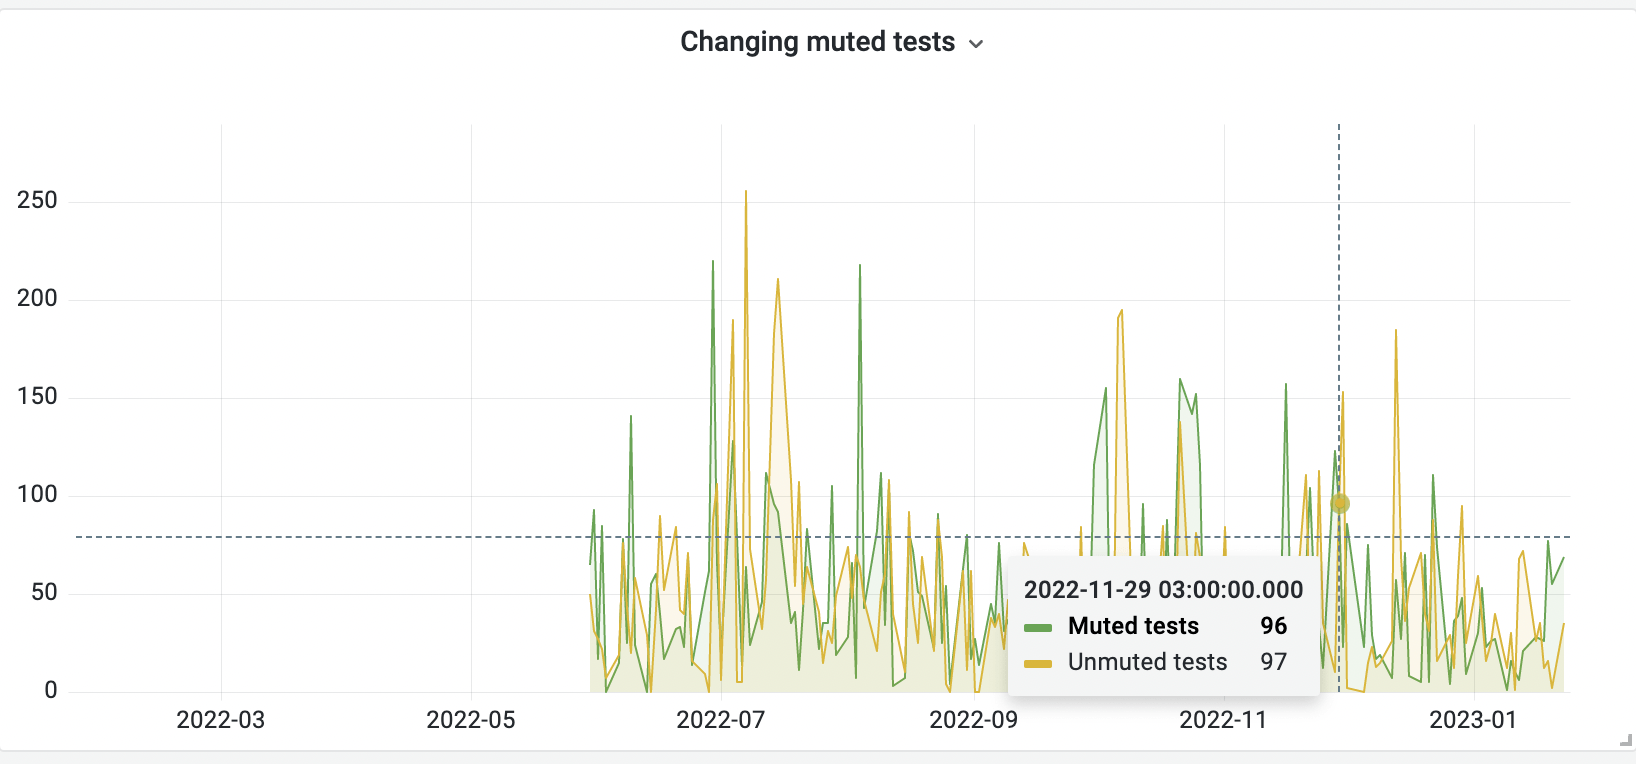 Muting and unmuting over time